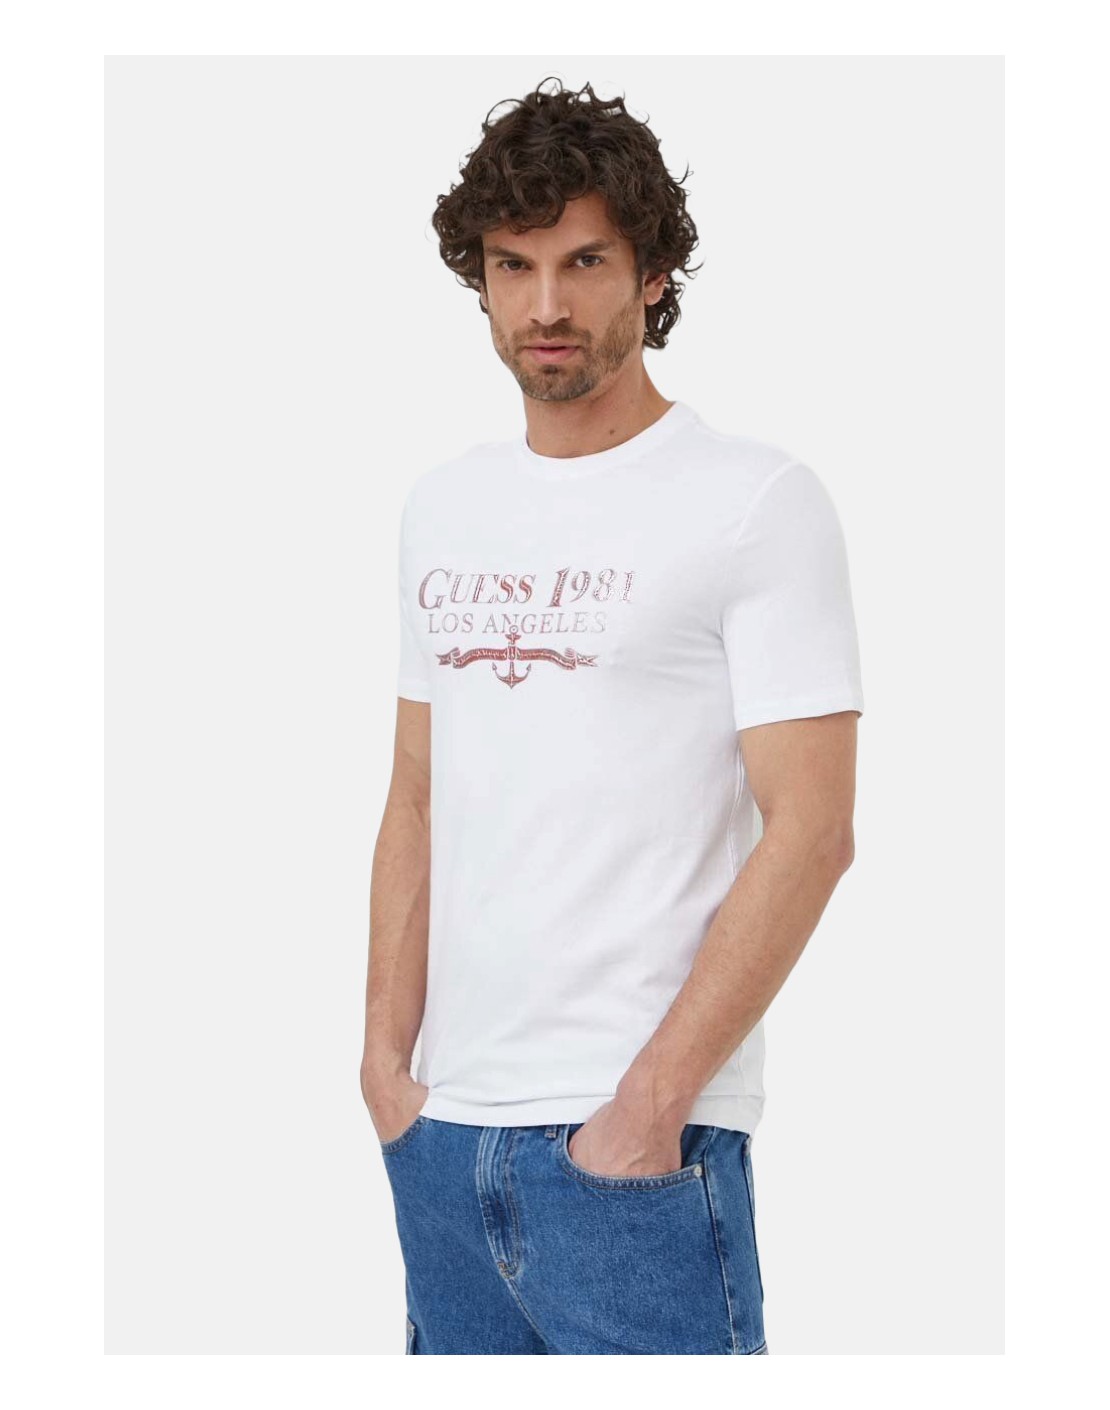 Guess Camiseta SS CN Guess 1981 Triangle Tee